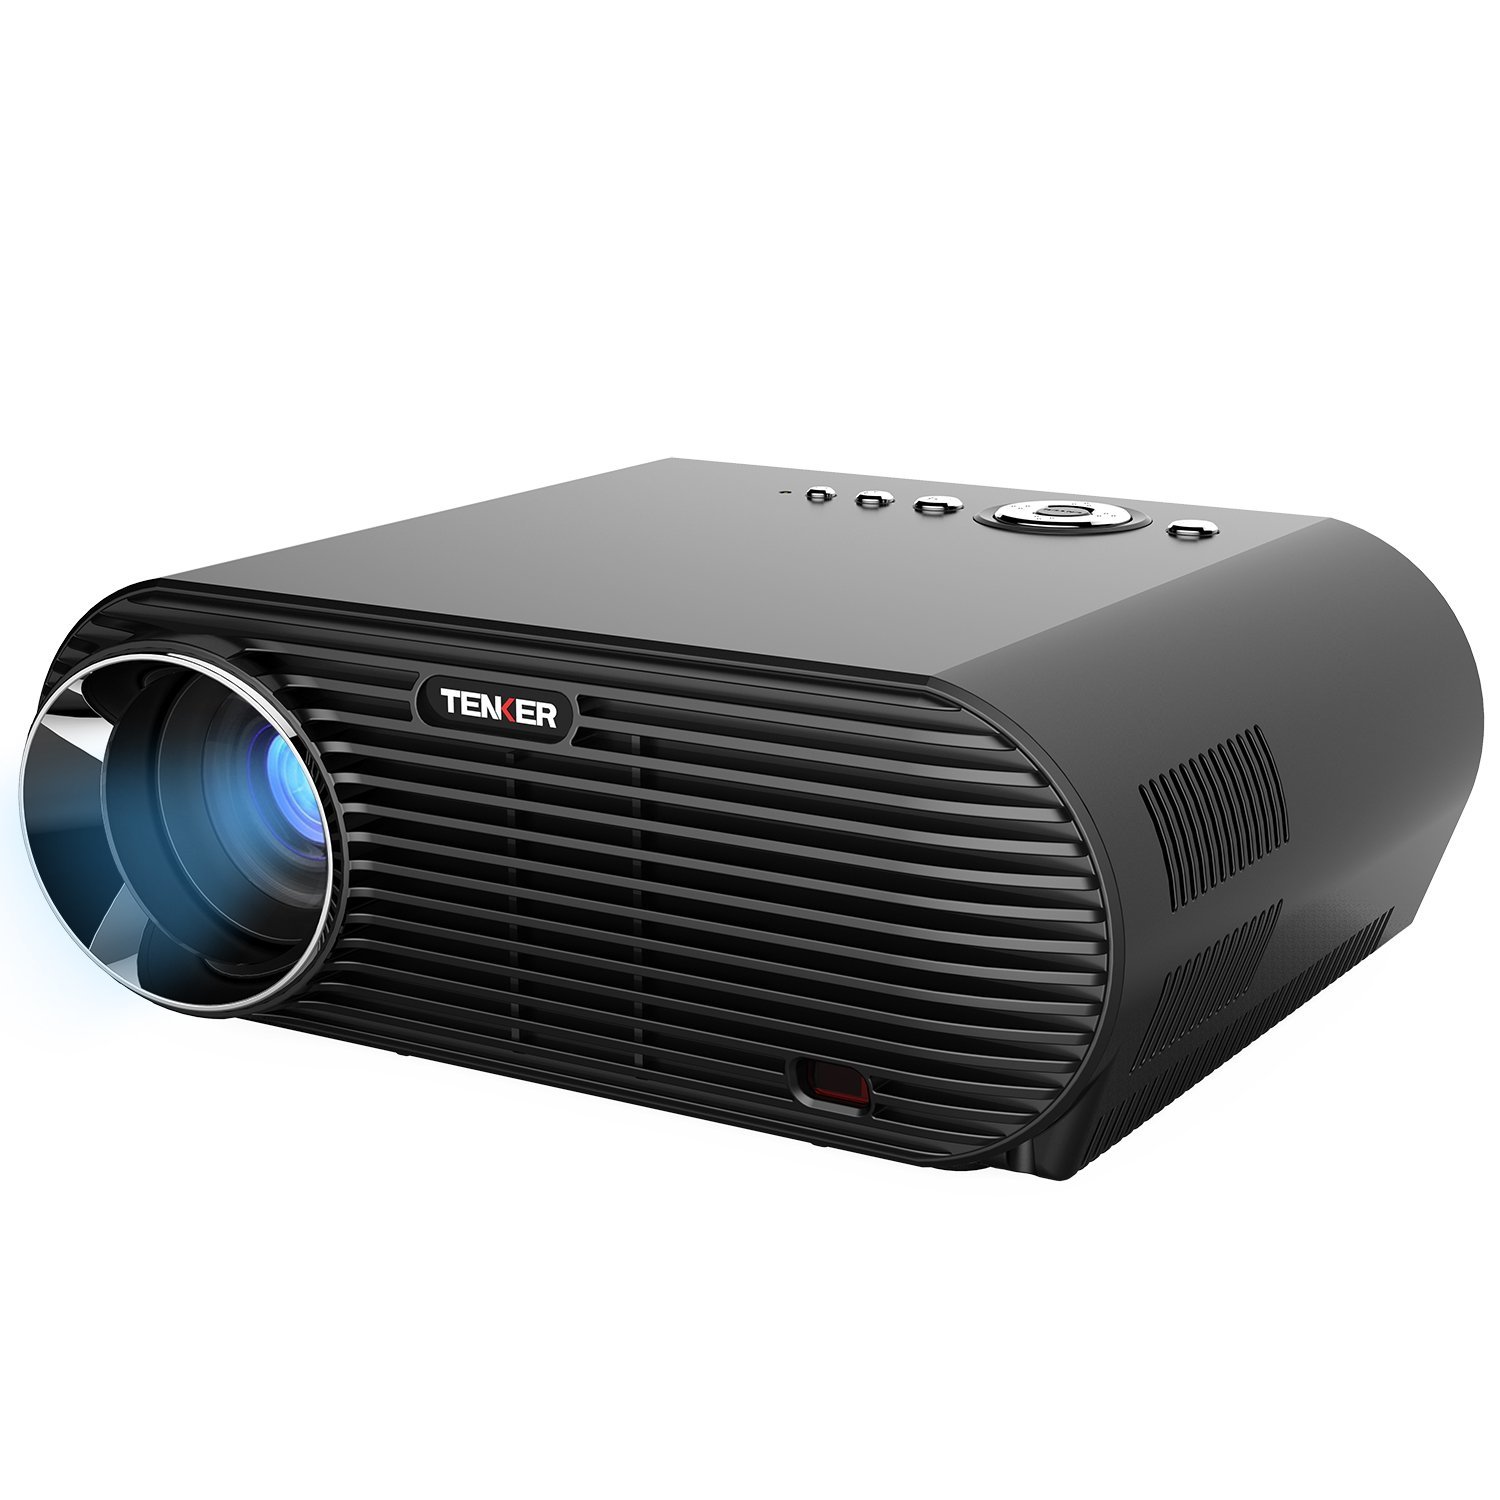 TENKER Projector, 3200 Lumens 1280x800 Resolution LCD Video Projector with HDMI Cable, Multimedia Portable Home Theater Projector Support 1080P HDMI USB VGA AV TV Laptop Game iPhone Android